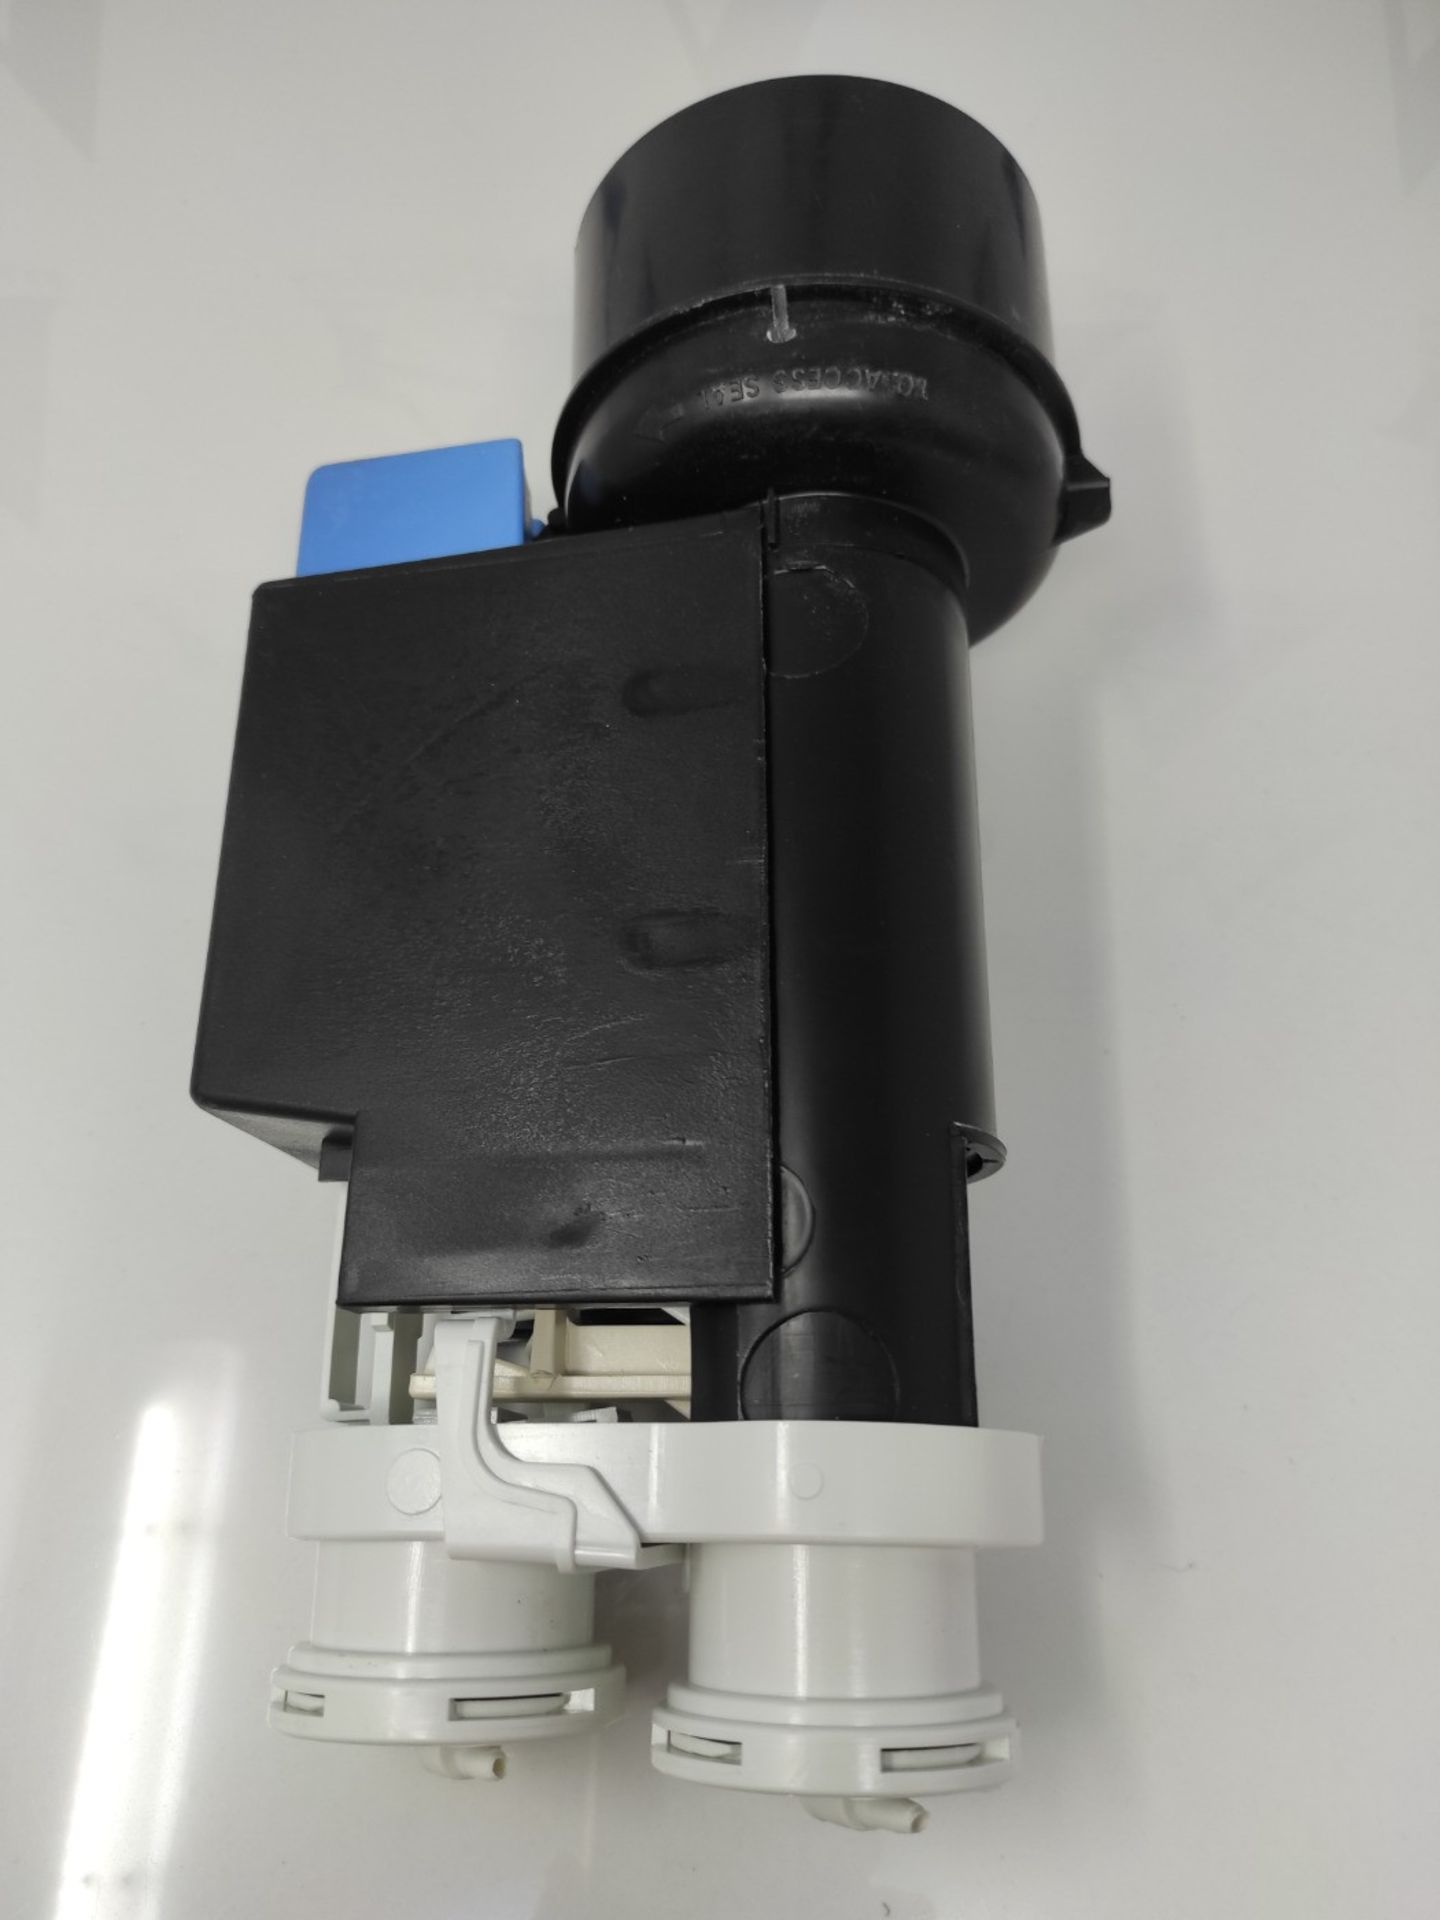 Ideal Standard Dual Flush Pmatic Outlet Valve, EV98167 (Replacement for SV93467), Mult - Image 3 of 3